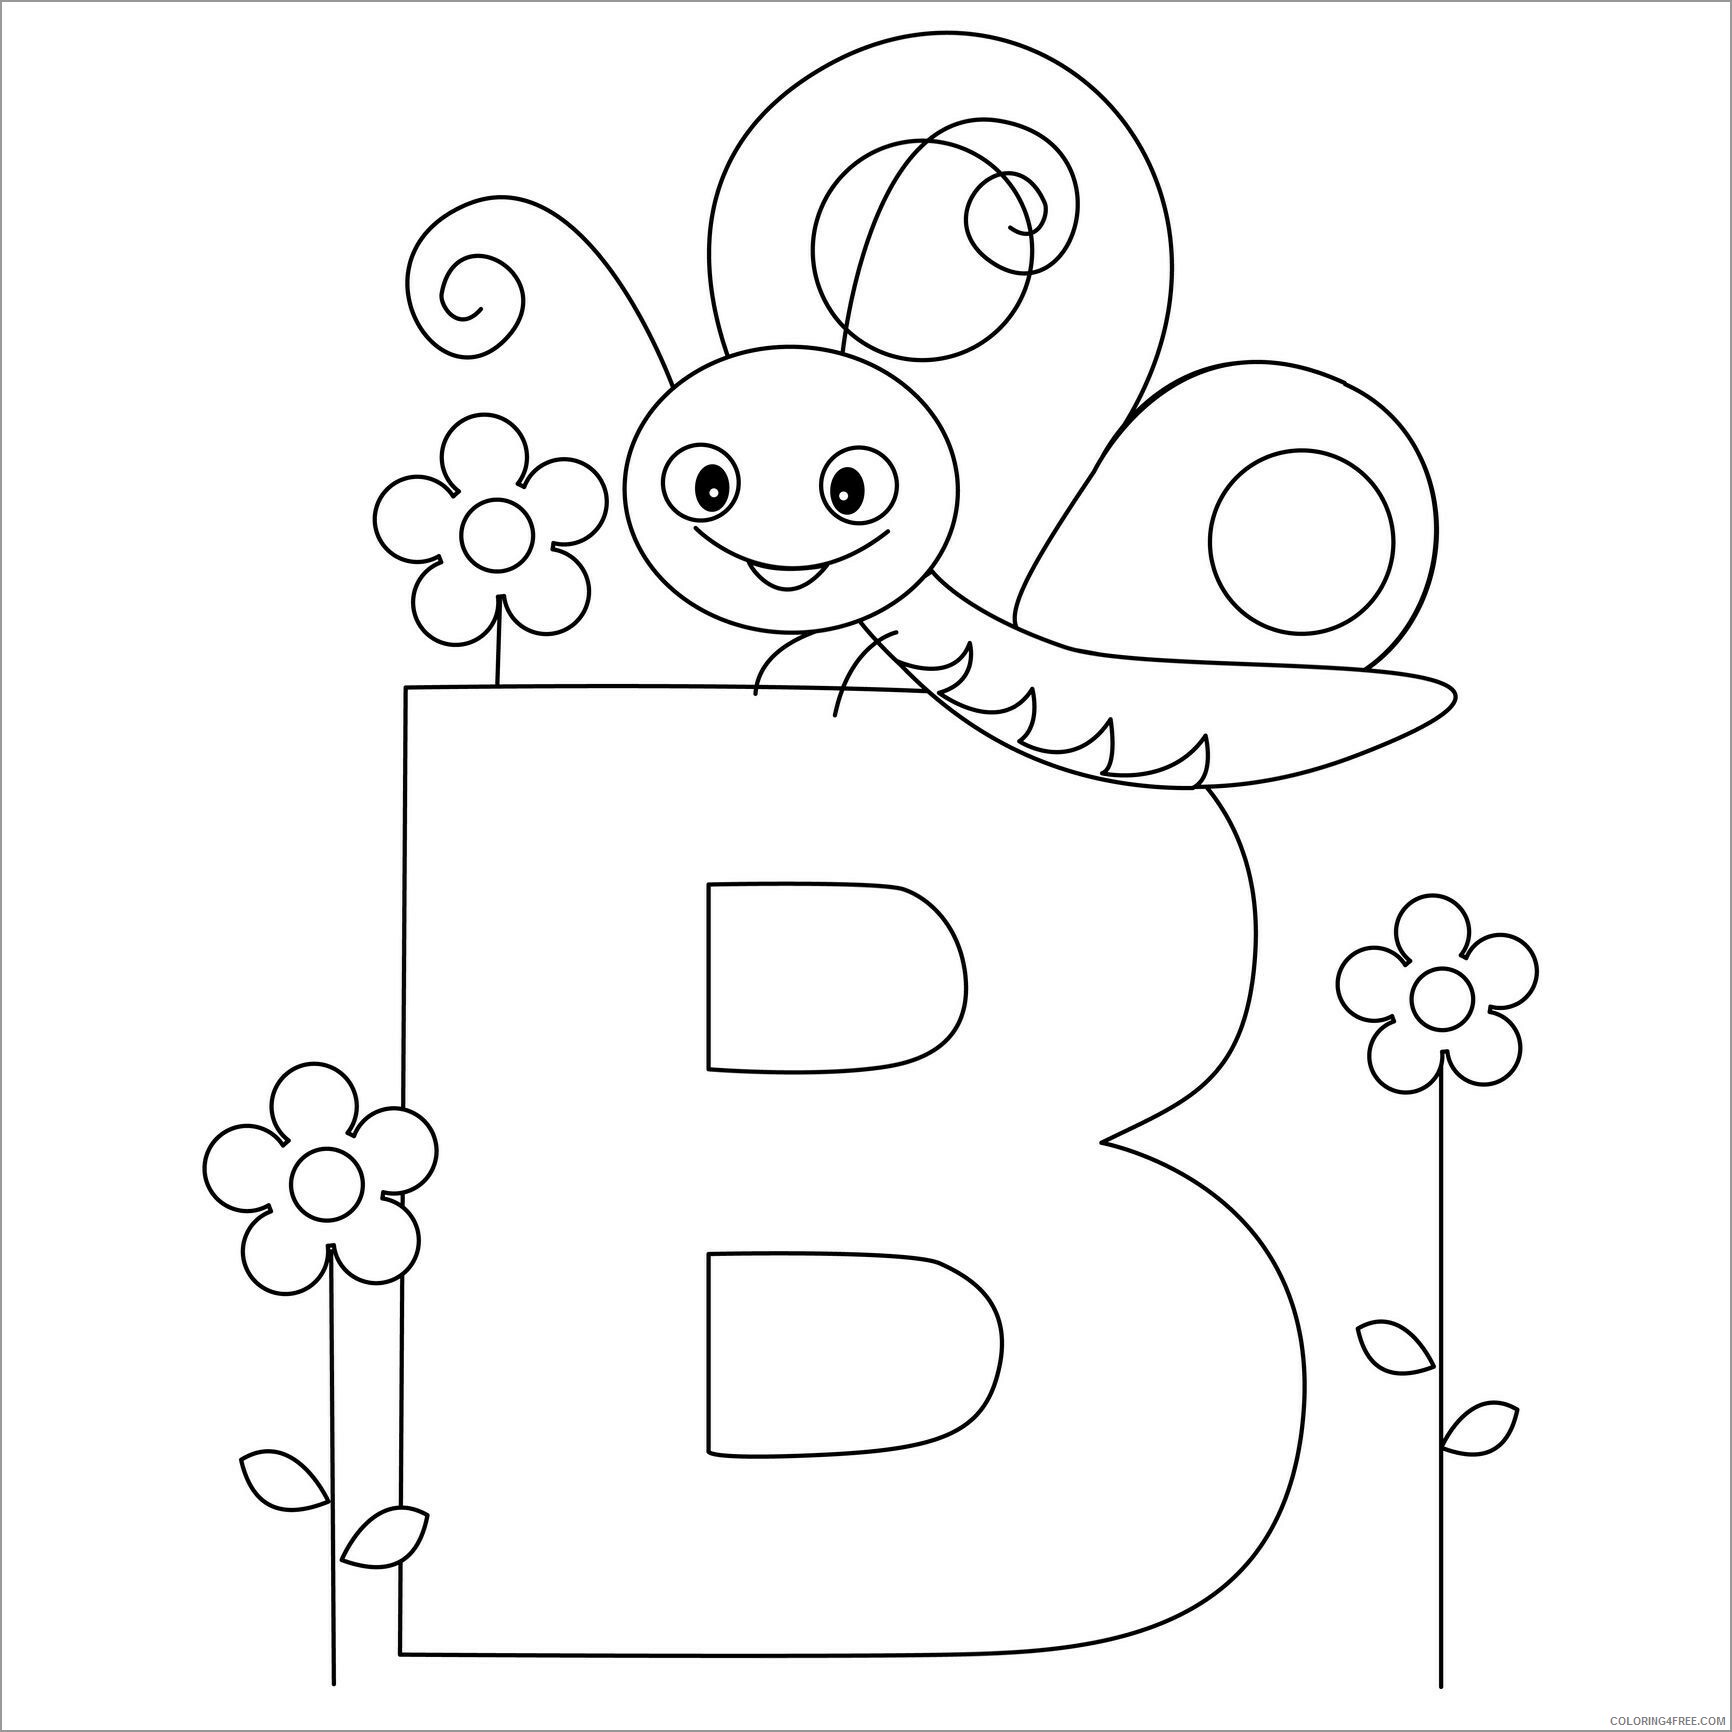 Butterfly Coloring Pages Animal Printable Sheets letter b for butterfly 2021 0709 Coloring4free